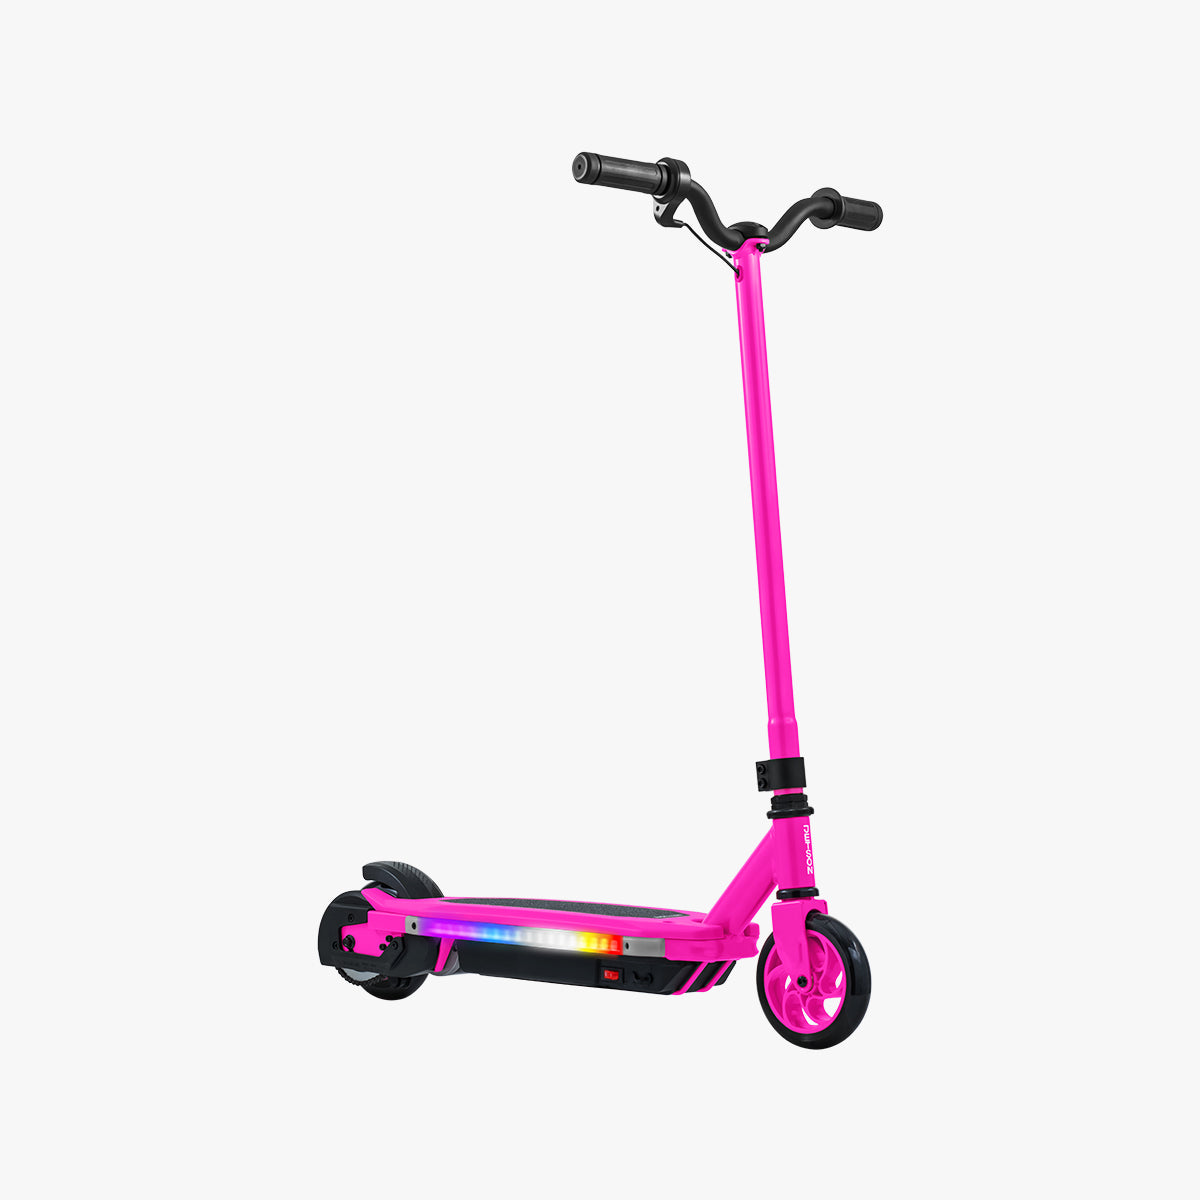 front angled view of the pink echo x electric scooter